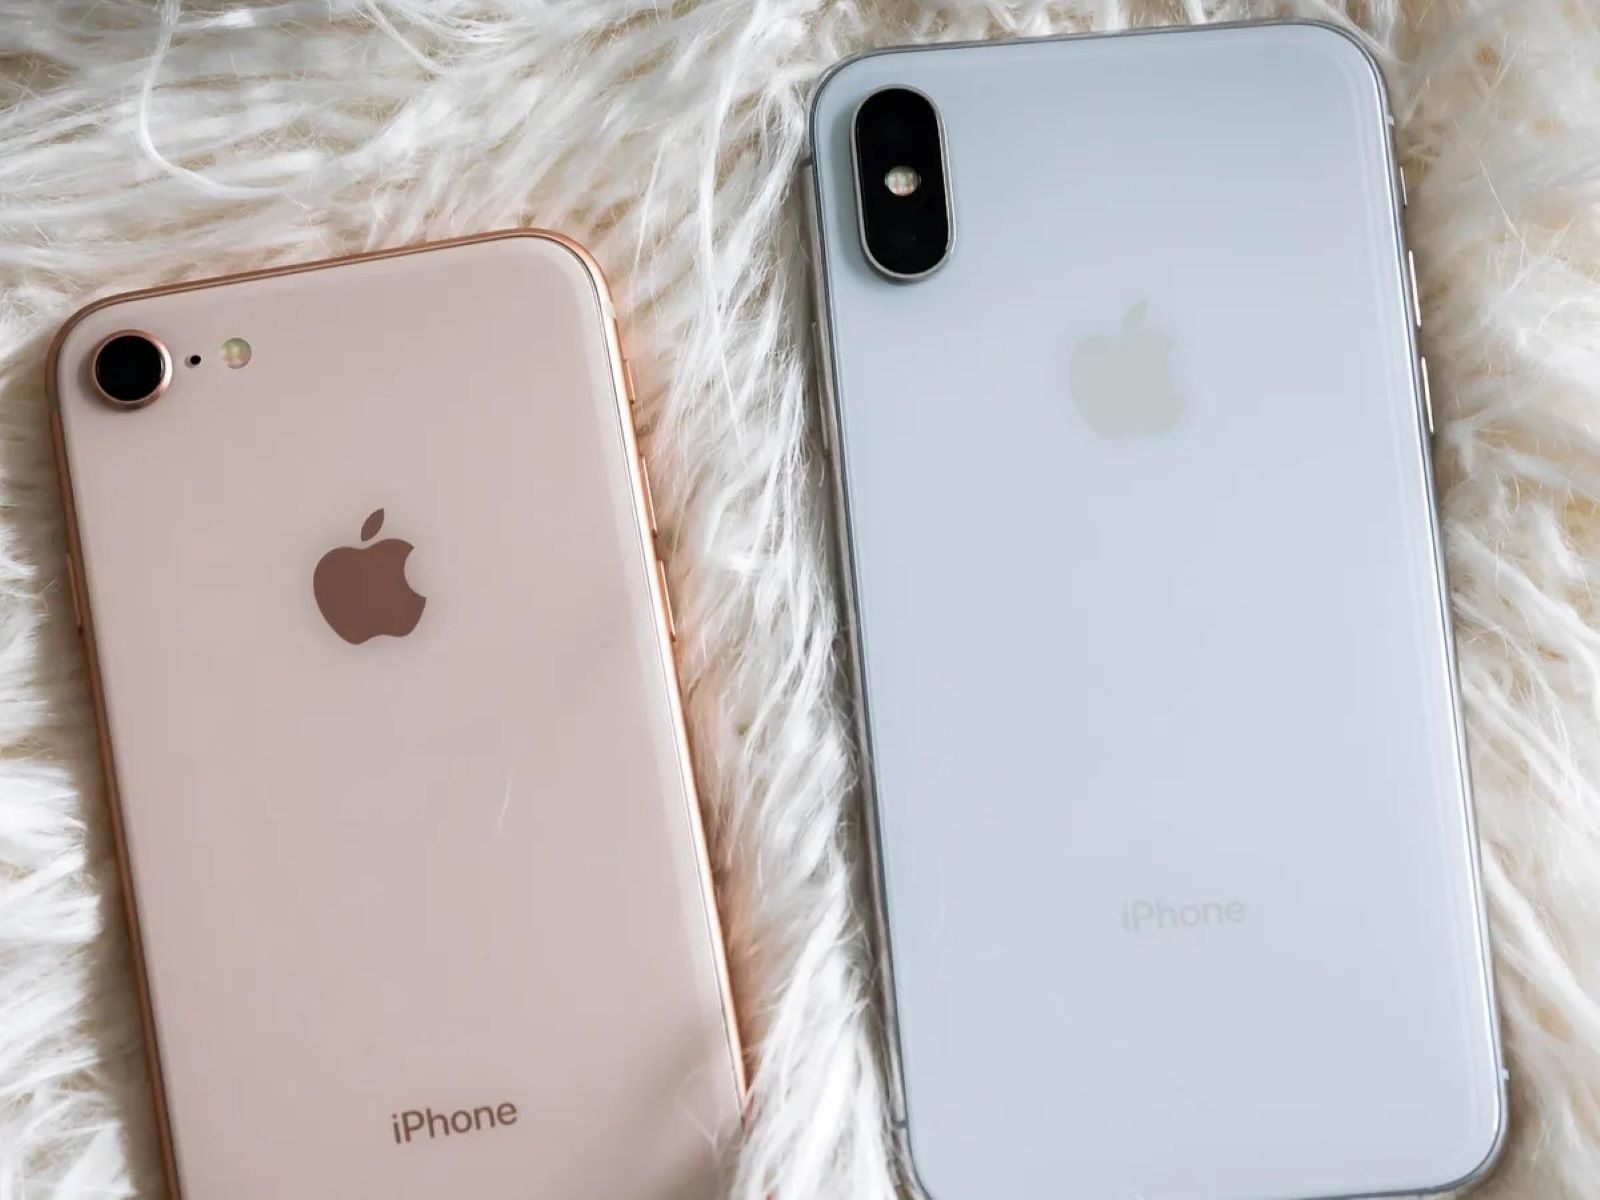 iphone-face-off-comparing-iphone-8-and-iphone-10